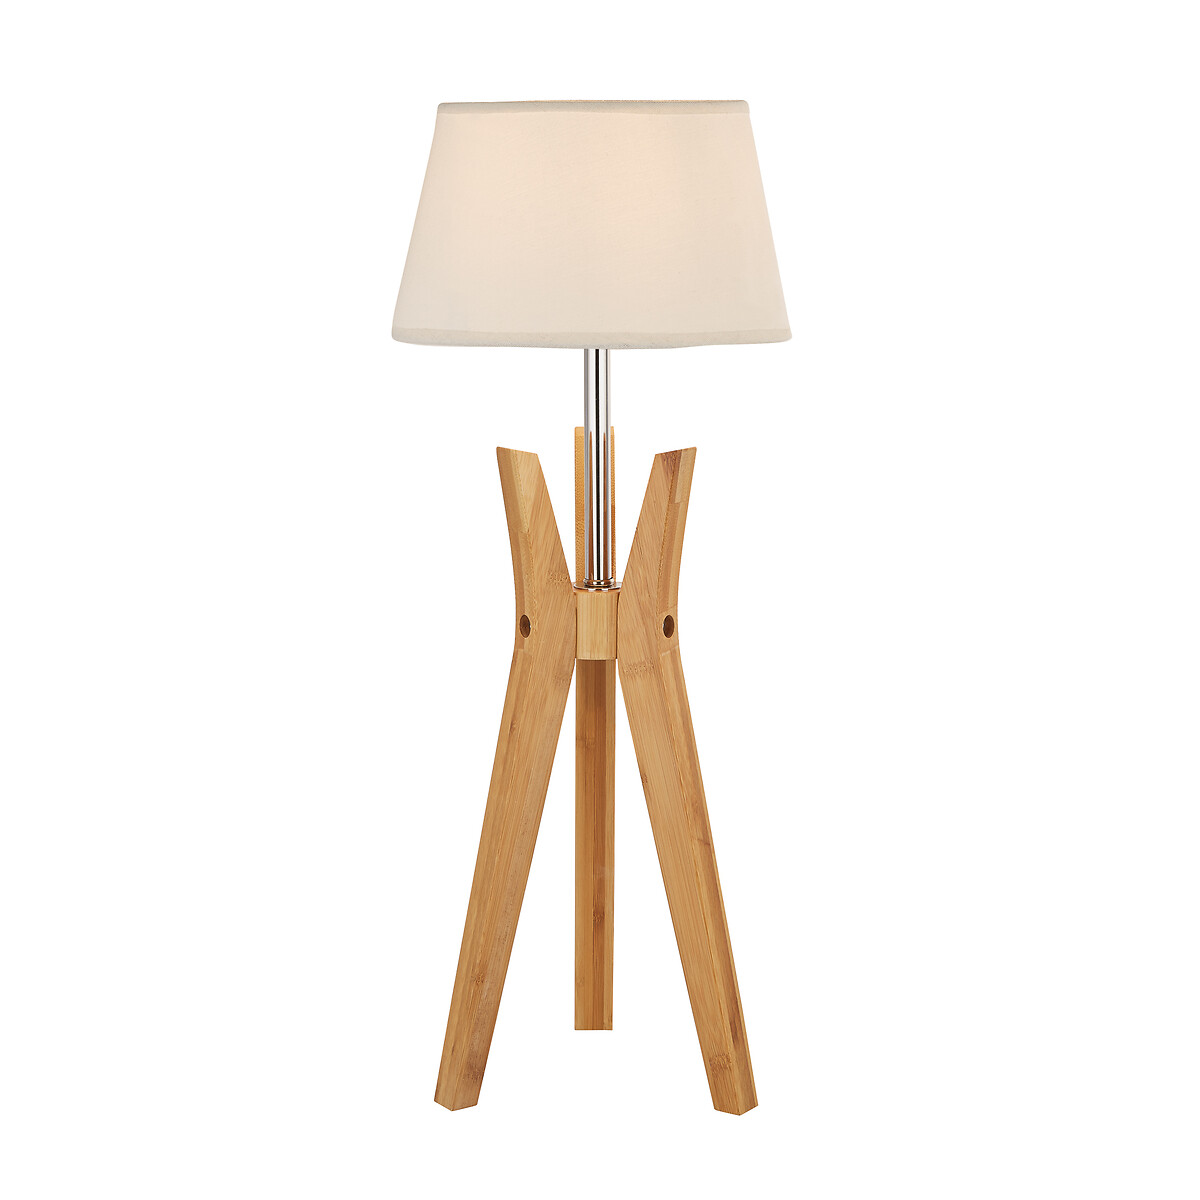 Tapered Natural Wood Tripod Table Lamp, Wooden Leg Table Lamp